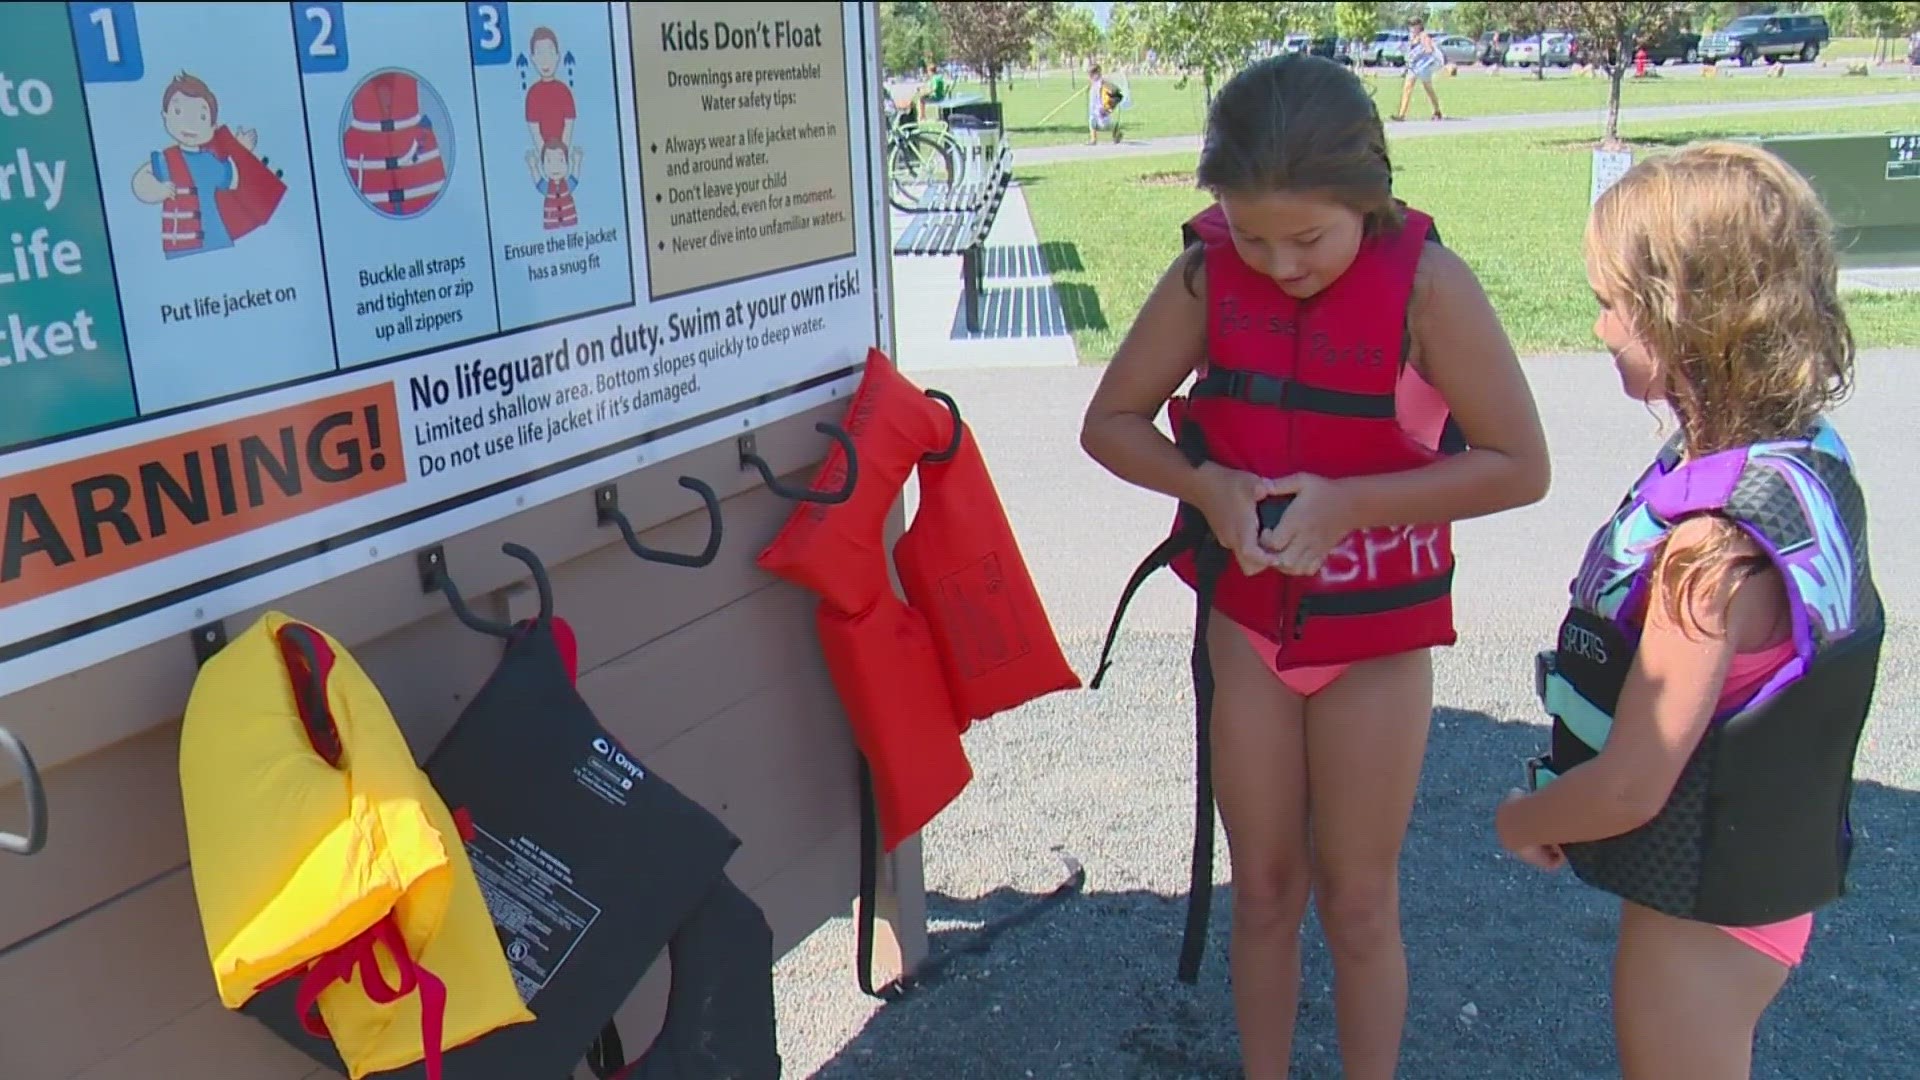 As southern Idaho settles into consistent triple-digit temperatures and spending time near bodies of water increases, St. Luke's is providing safety tips for kids.